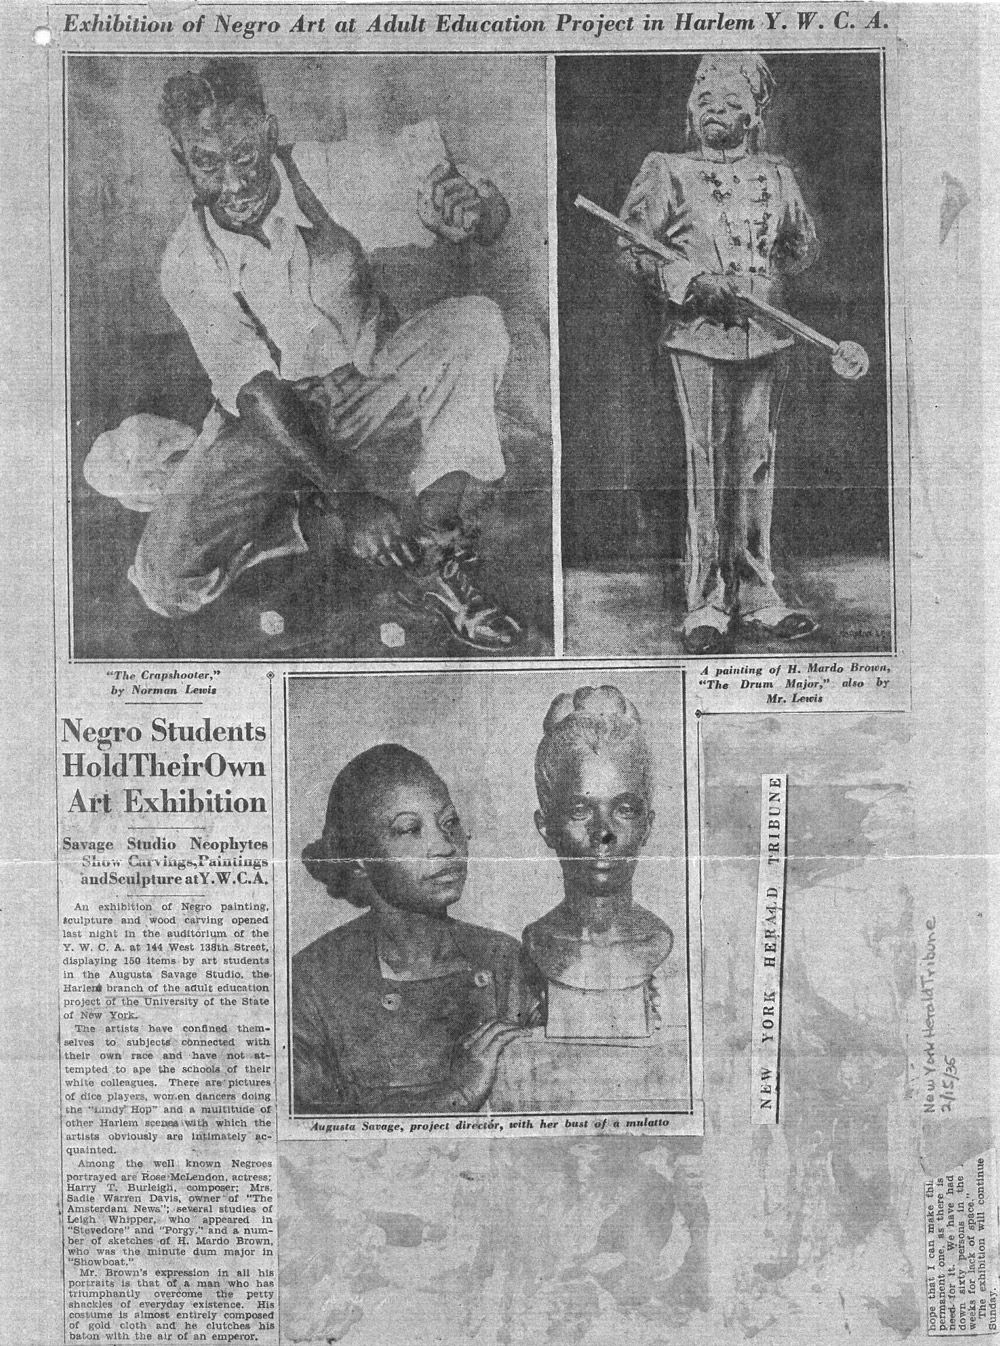 Newspaper clipping featuring "Gwendolyn Knight" by Augusta Savage